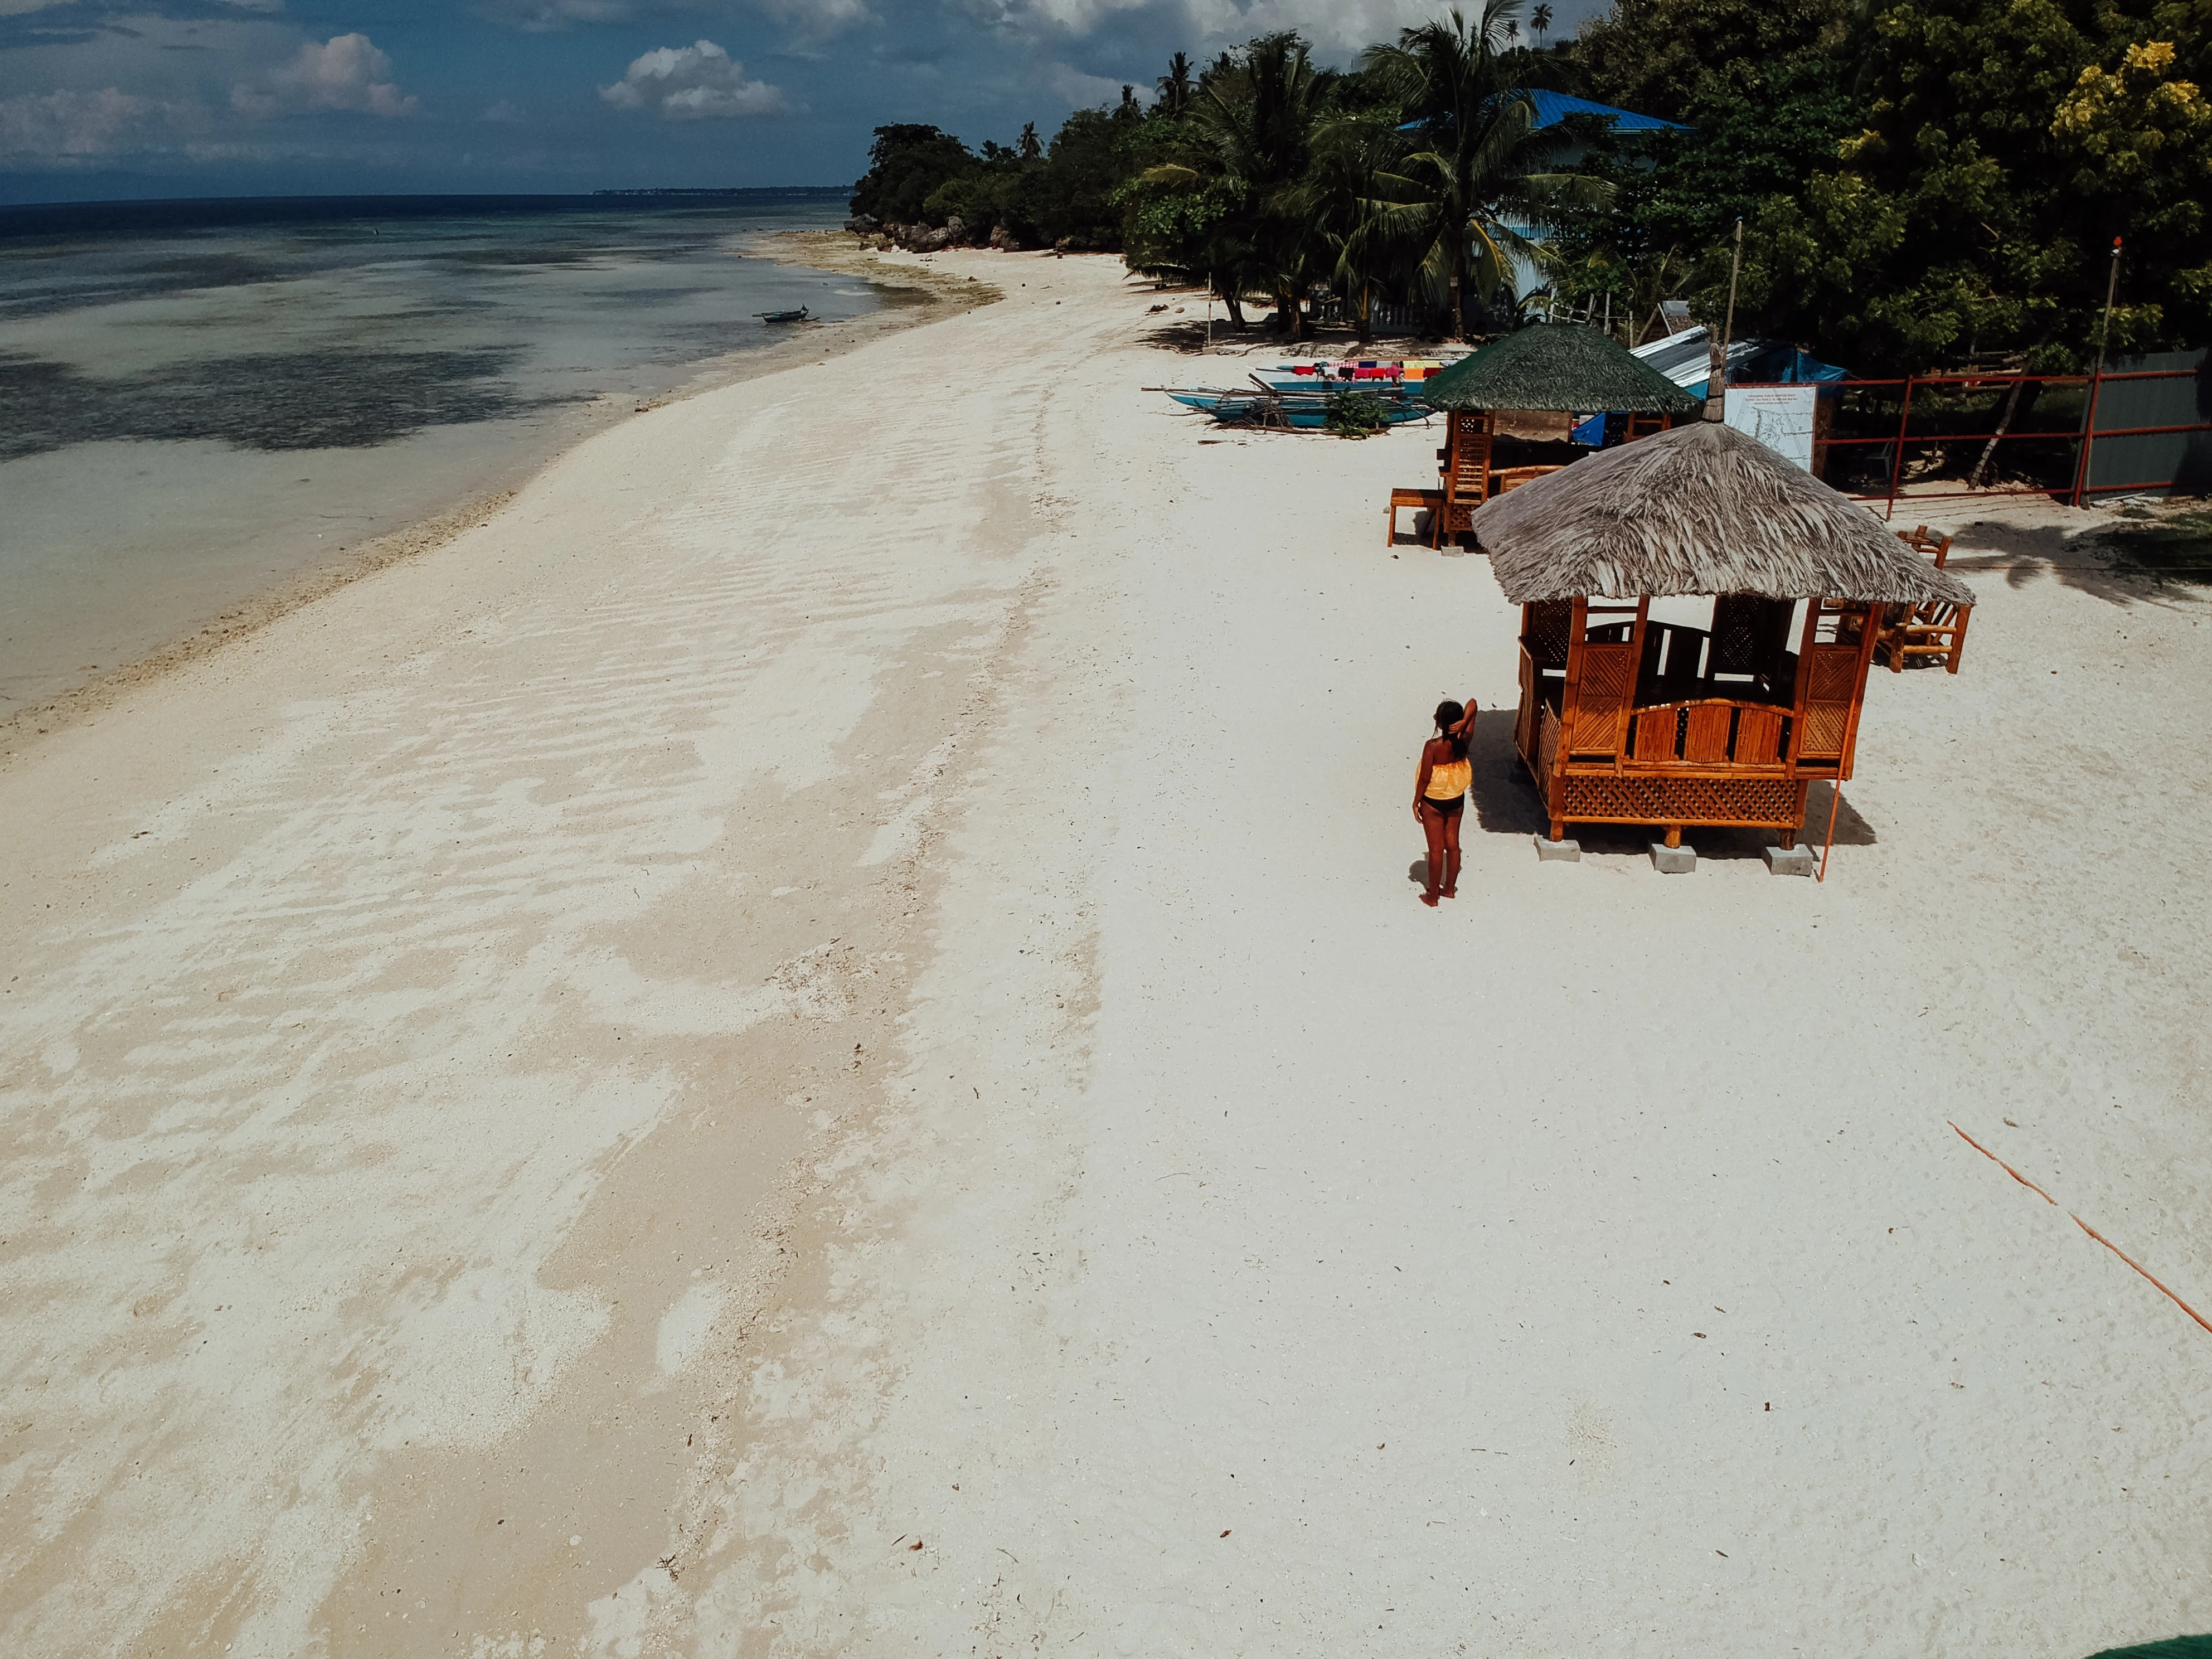 Moalboal Itinerary, things to do in moalboal, what to do in moalboal at night, moalboal cebu itinerary, moalboal philippines, where to stay in moalboal,moalboal tourism,basdaku moalboal,things to see in moalboal cebu, pescadores island, Lambug Beach